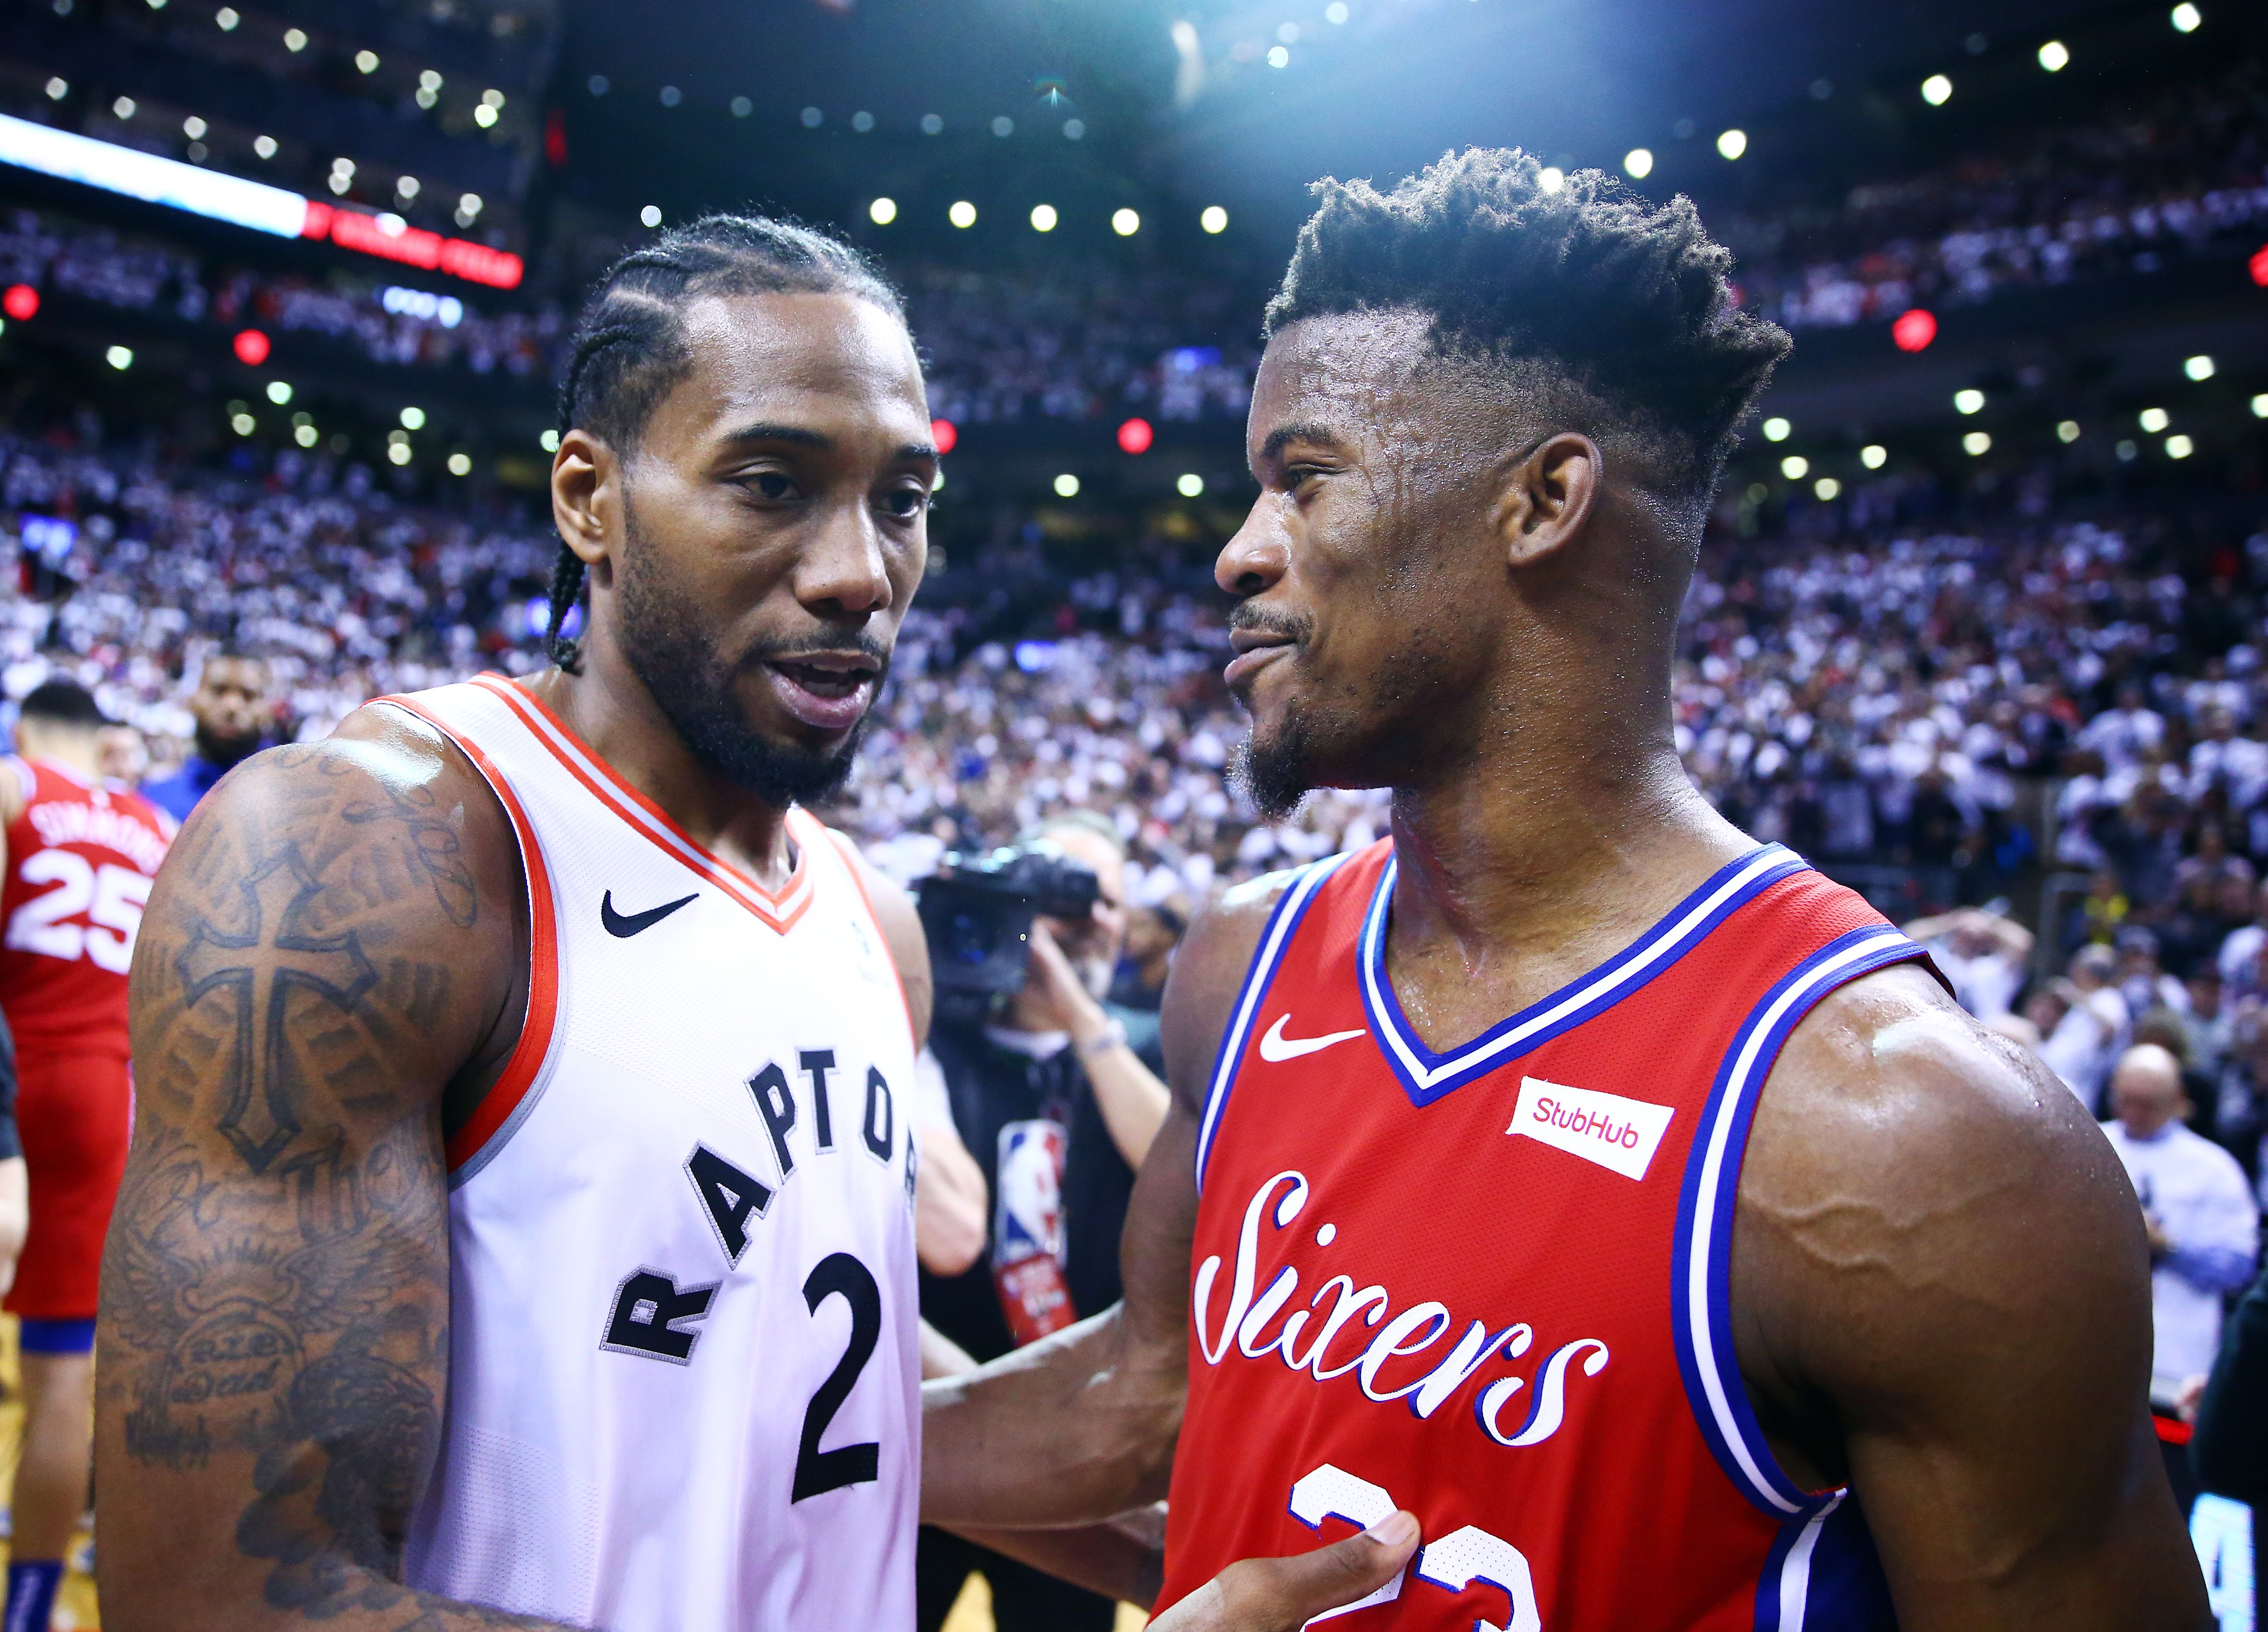 Kawhi Leonard and Jimmy Butler having a friendly conversation after the game